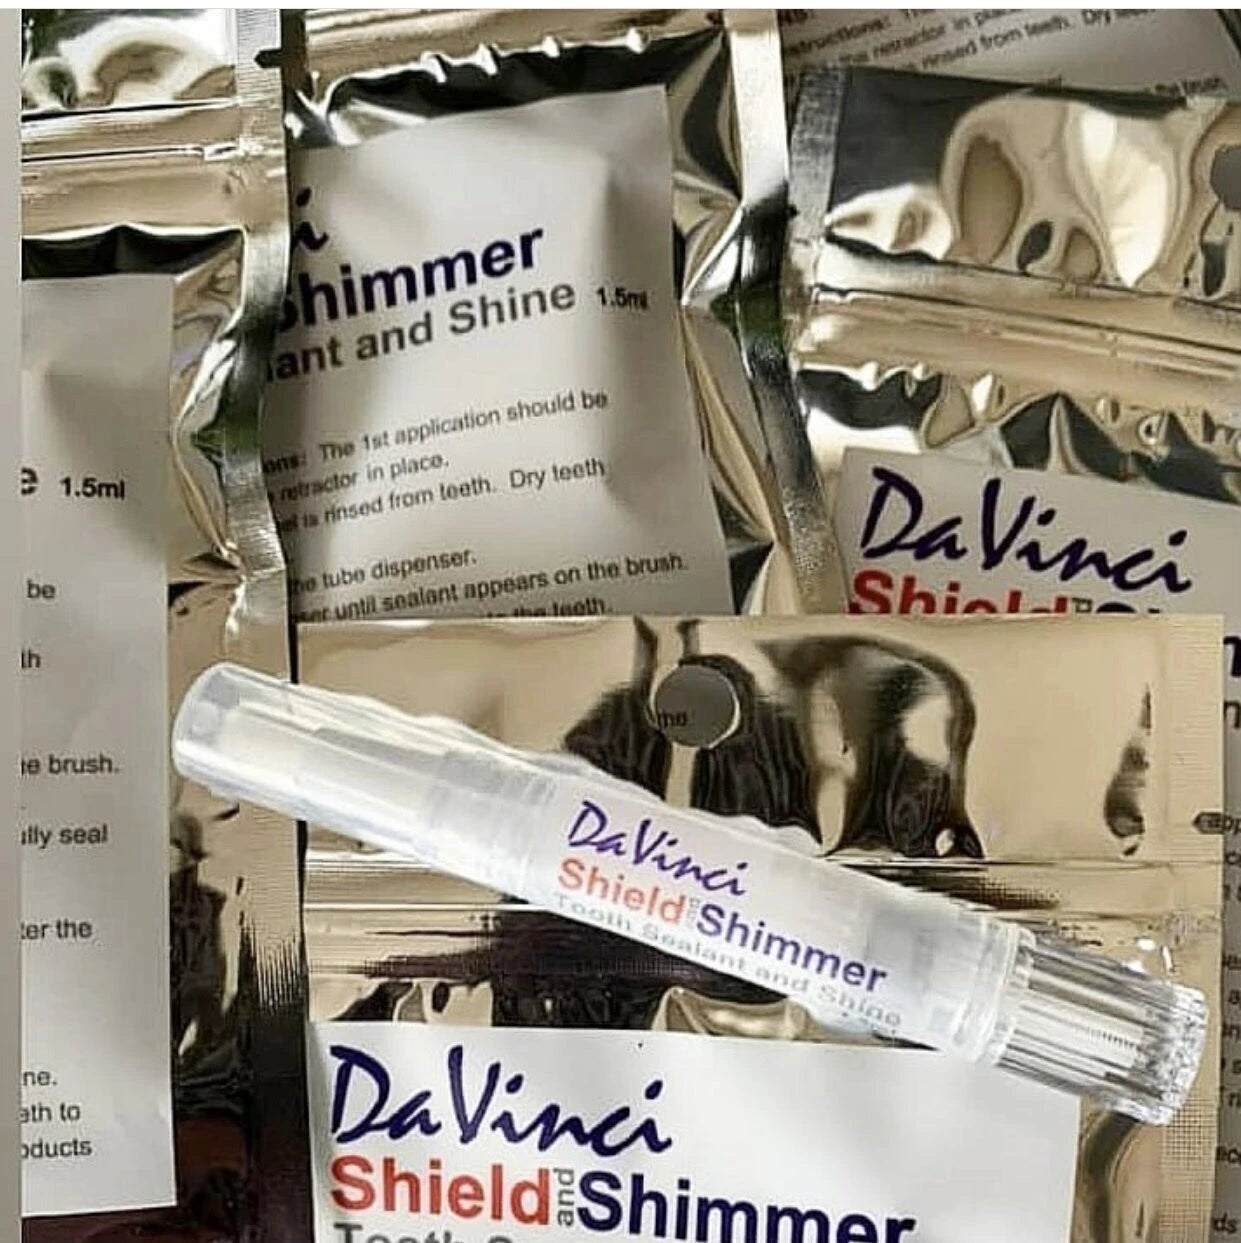 Da Vinci | Shield and Shimmer Tooth Sealant: Protection and Sparkle 1